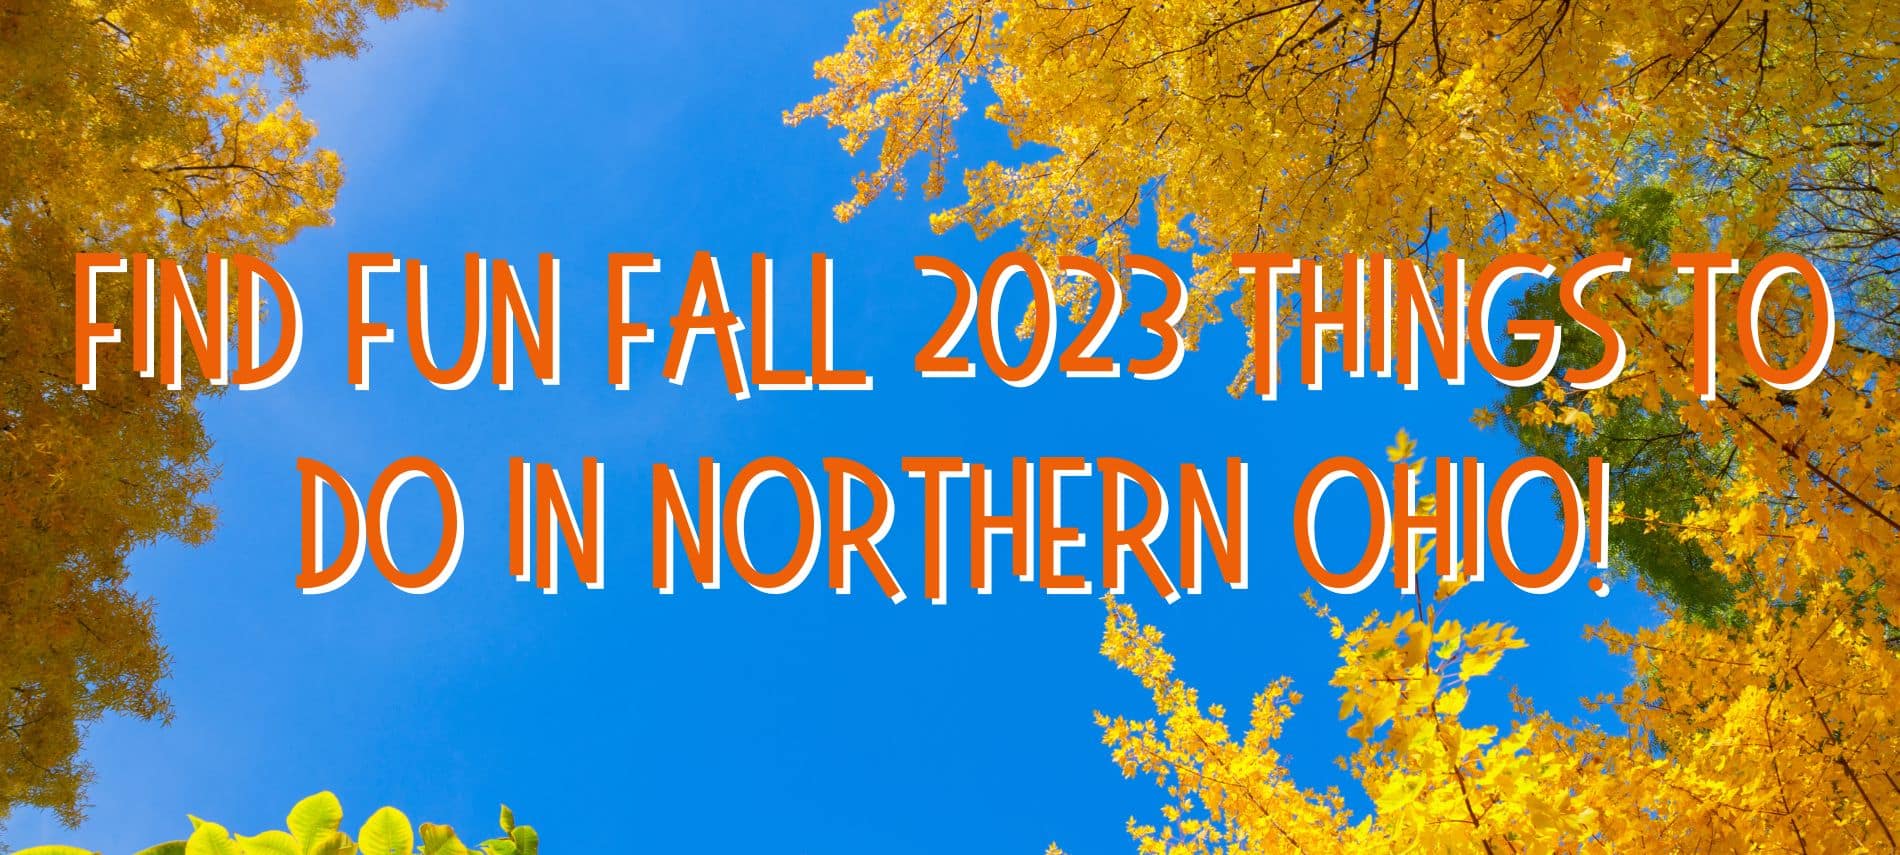 Background of blue sky and fall foliage with text "Find Fun Fall 2023 Things to Do in Northern Ohio!"